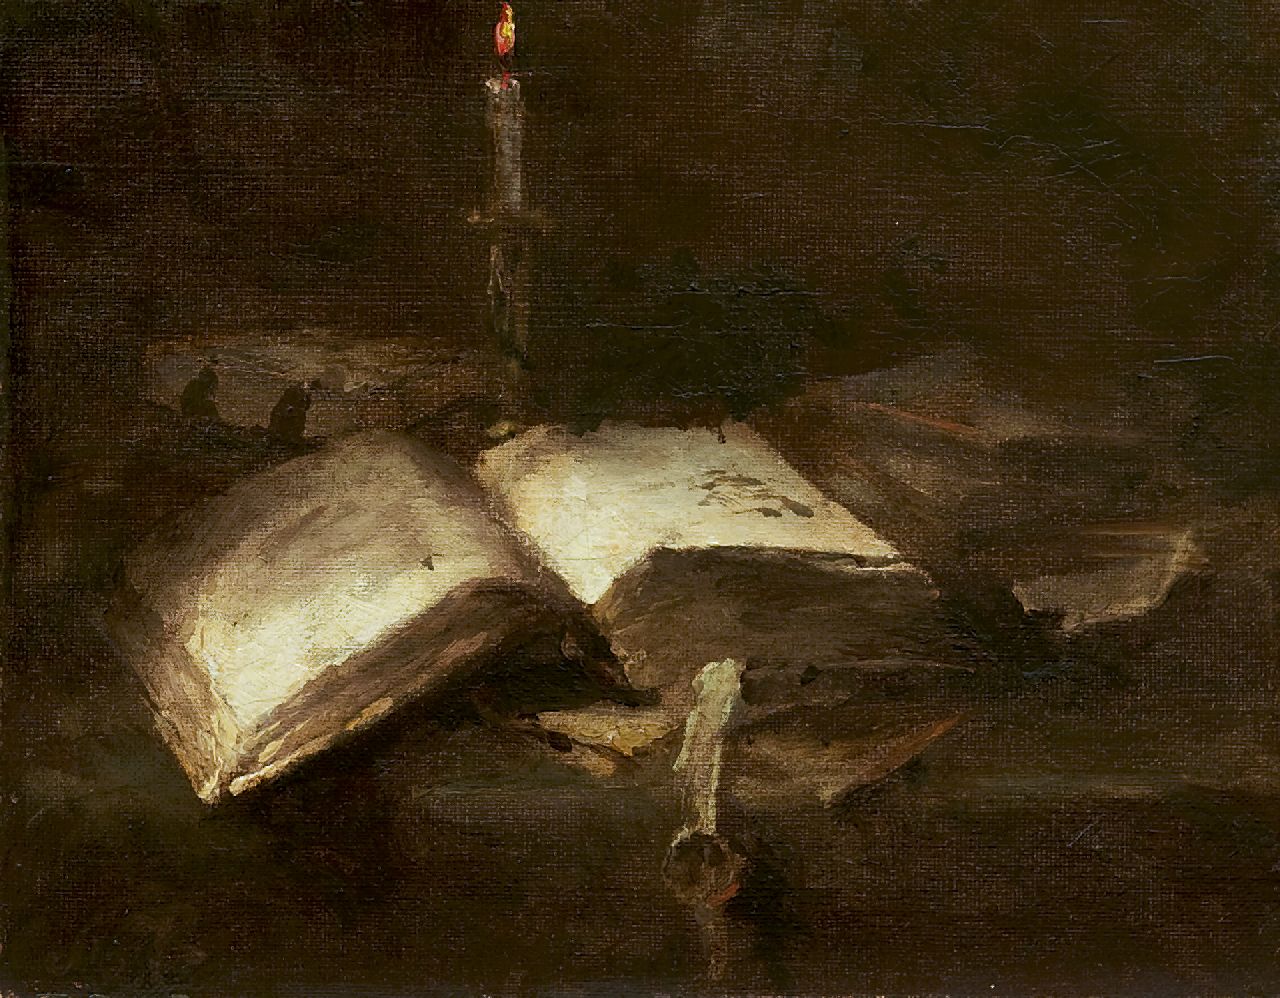 Roosenboom M.C.J.W.H.  | 'Margaretha' Cornelia Johanna Wilhelmina Henriëtta Roosenboom, Still life with a bible, oil on canvas 18.8 x 24.0 cm, signed l.l. with initials and executed in 1891